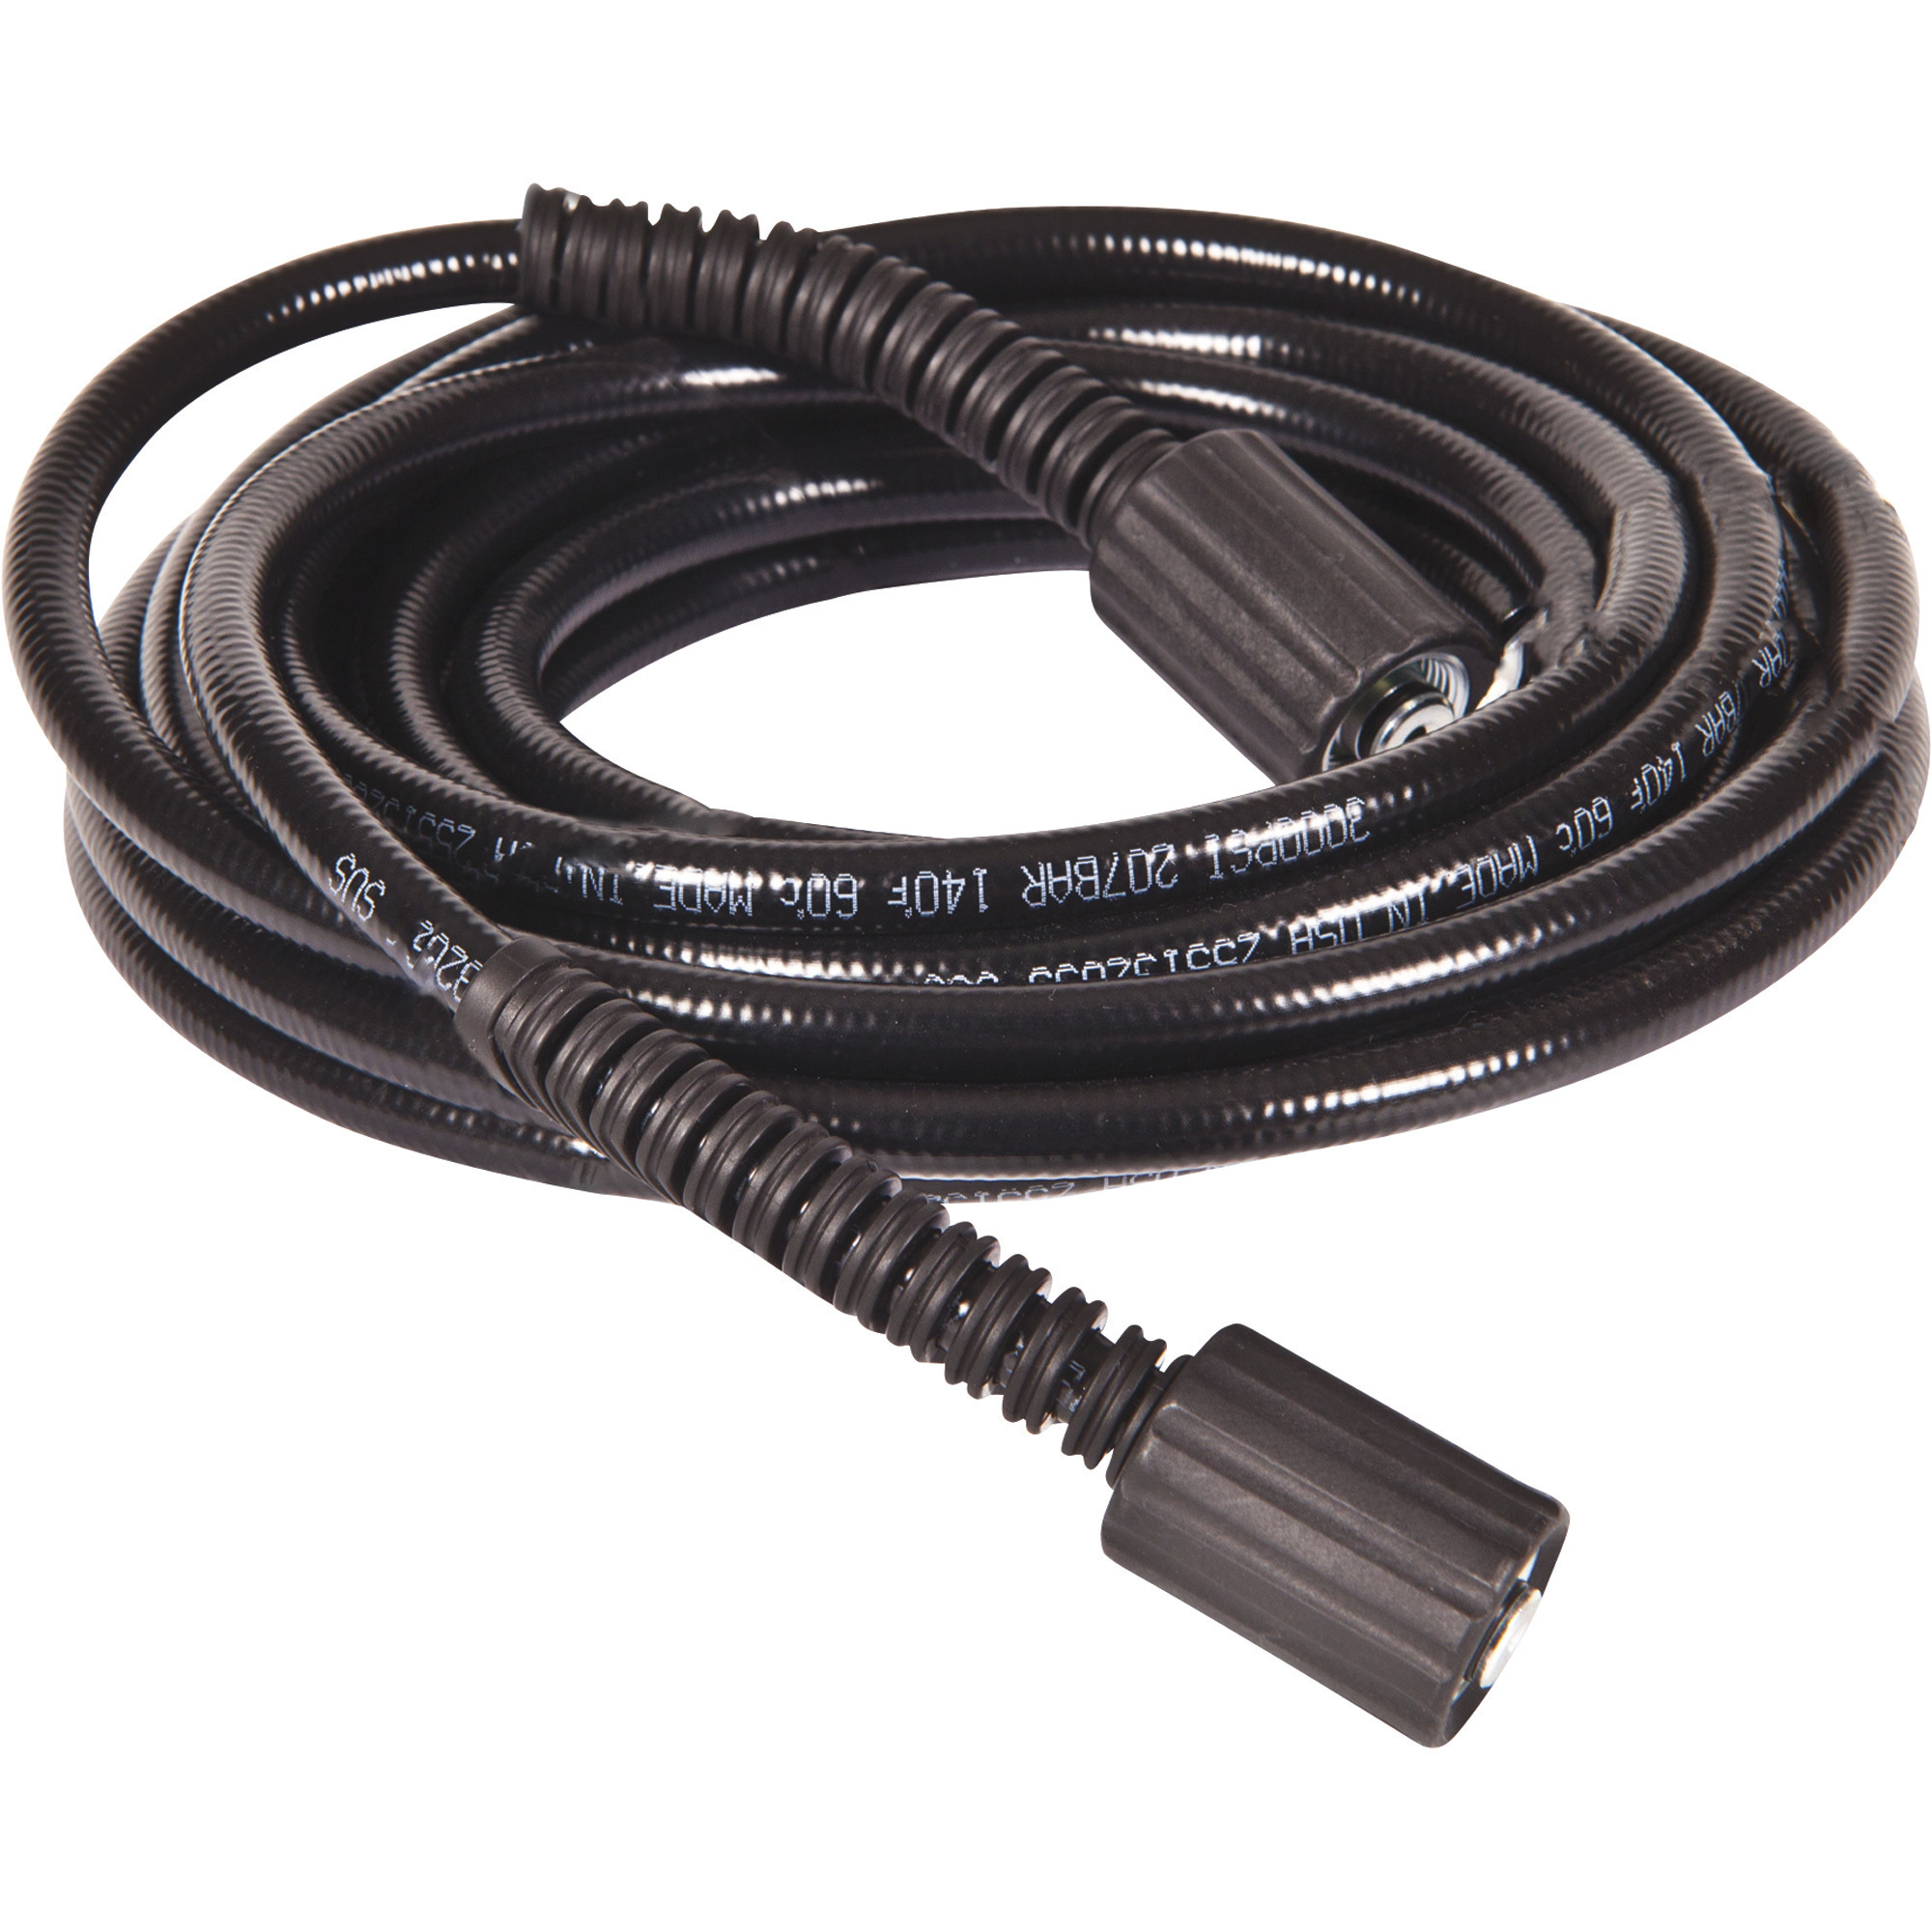 Powerhorse Nonmarking Pressure Washer Hose, 3000 PSI, 25ft. x 1/4Inch, 14mm M22 x M22 Connectors, Model 646200540